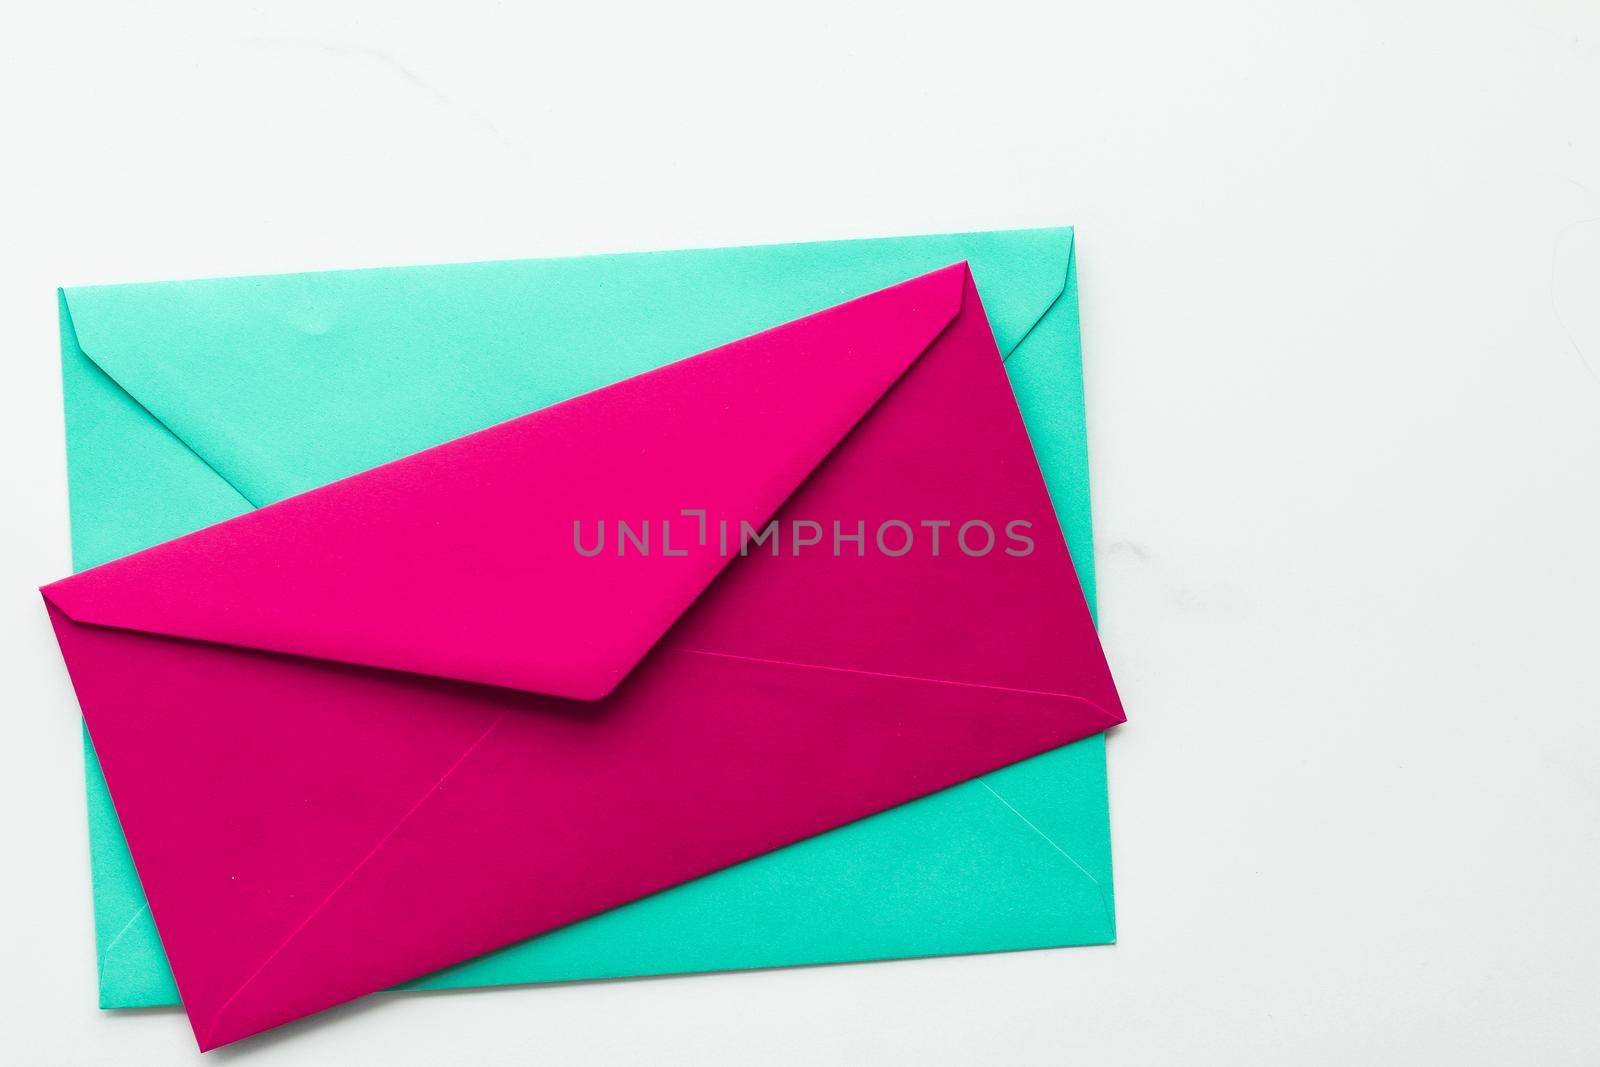 Blank paper envelopes on marble flatlay background, holiday mail letter or post card message design by Anneleven